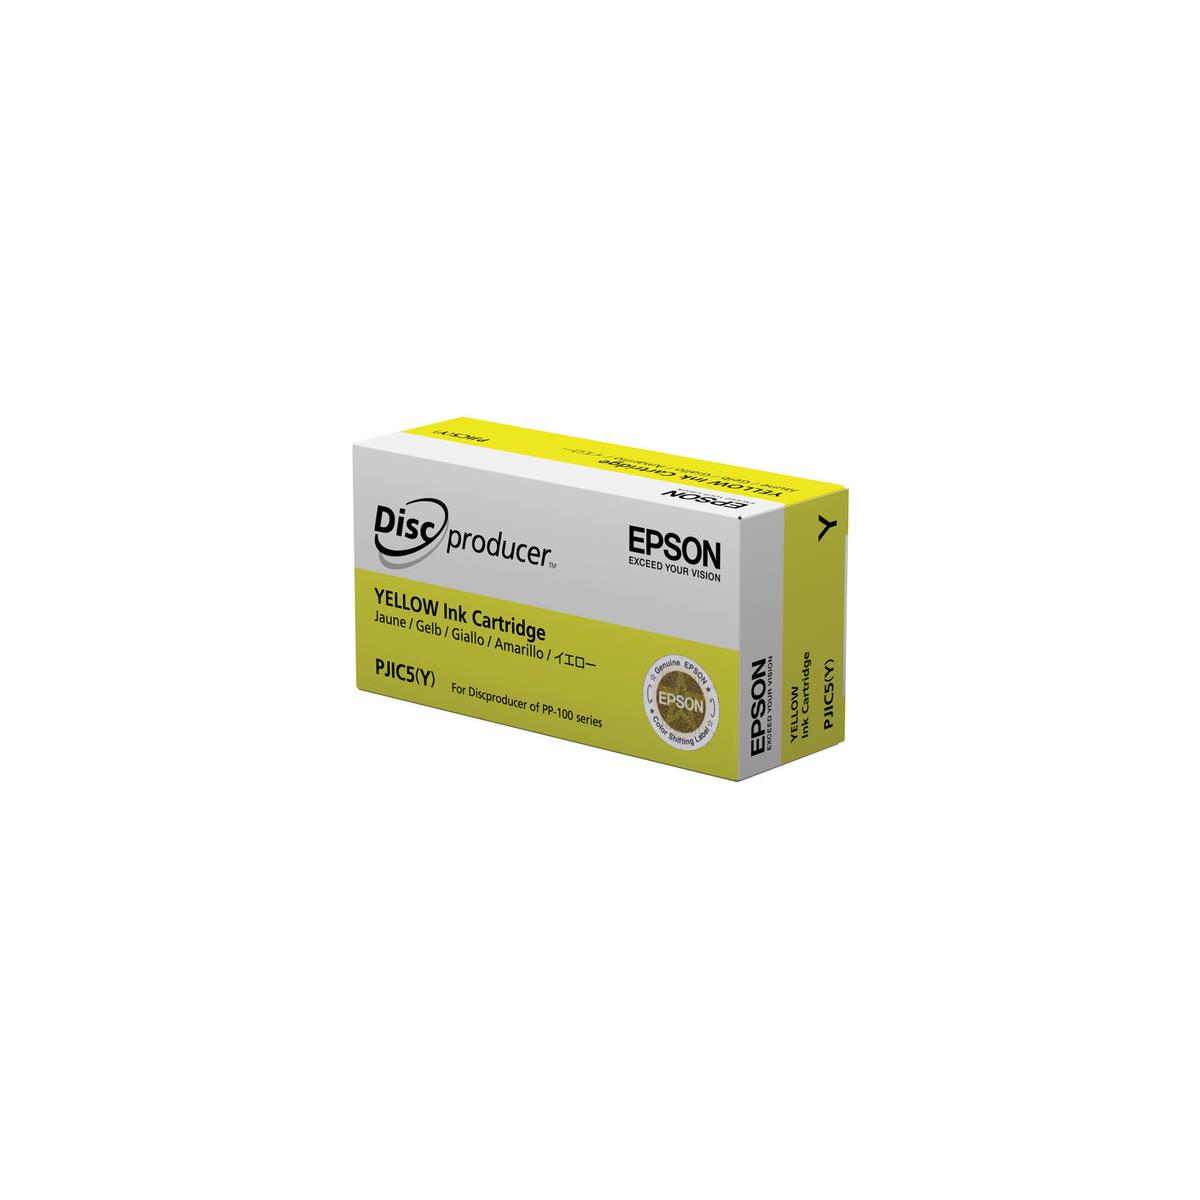 Image of Microboards Technology Epson Yellow Ink Cartridge for PP-100 Printer